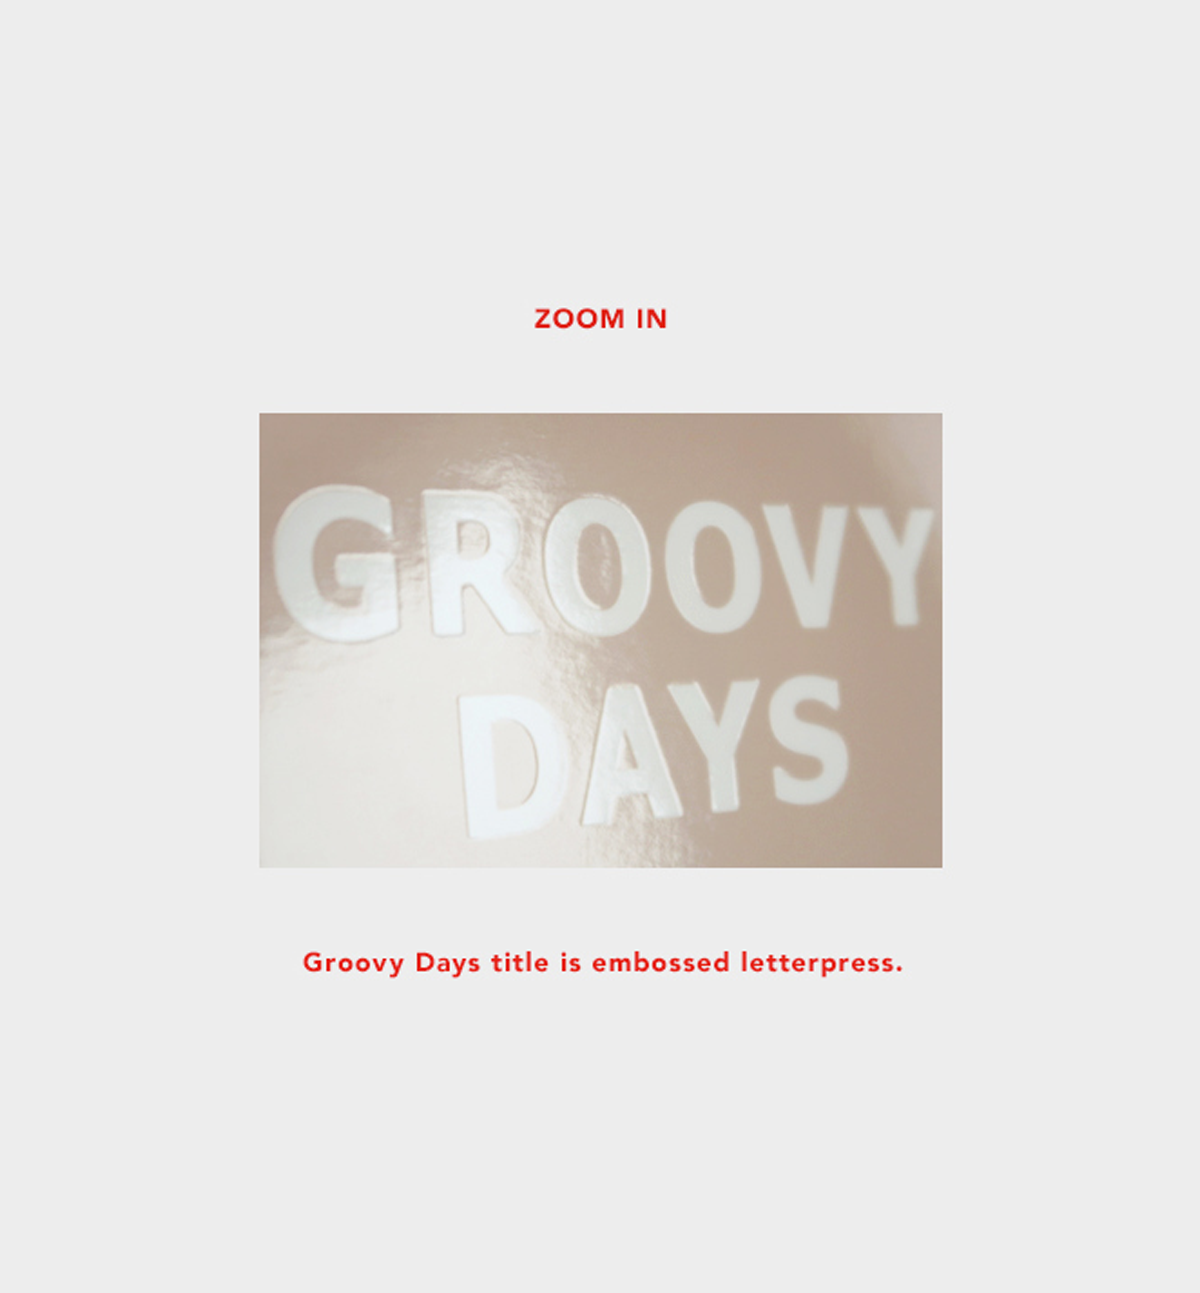 Groovy Days Weekly Planner [Mint]